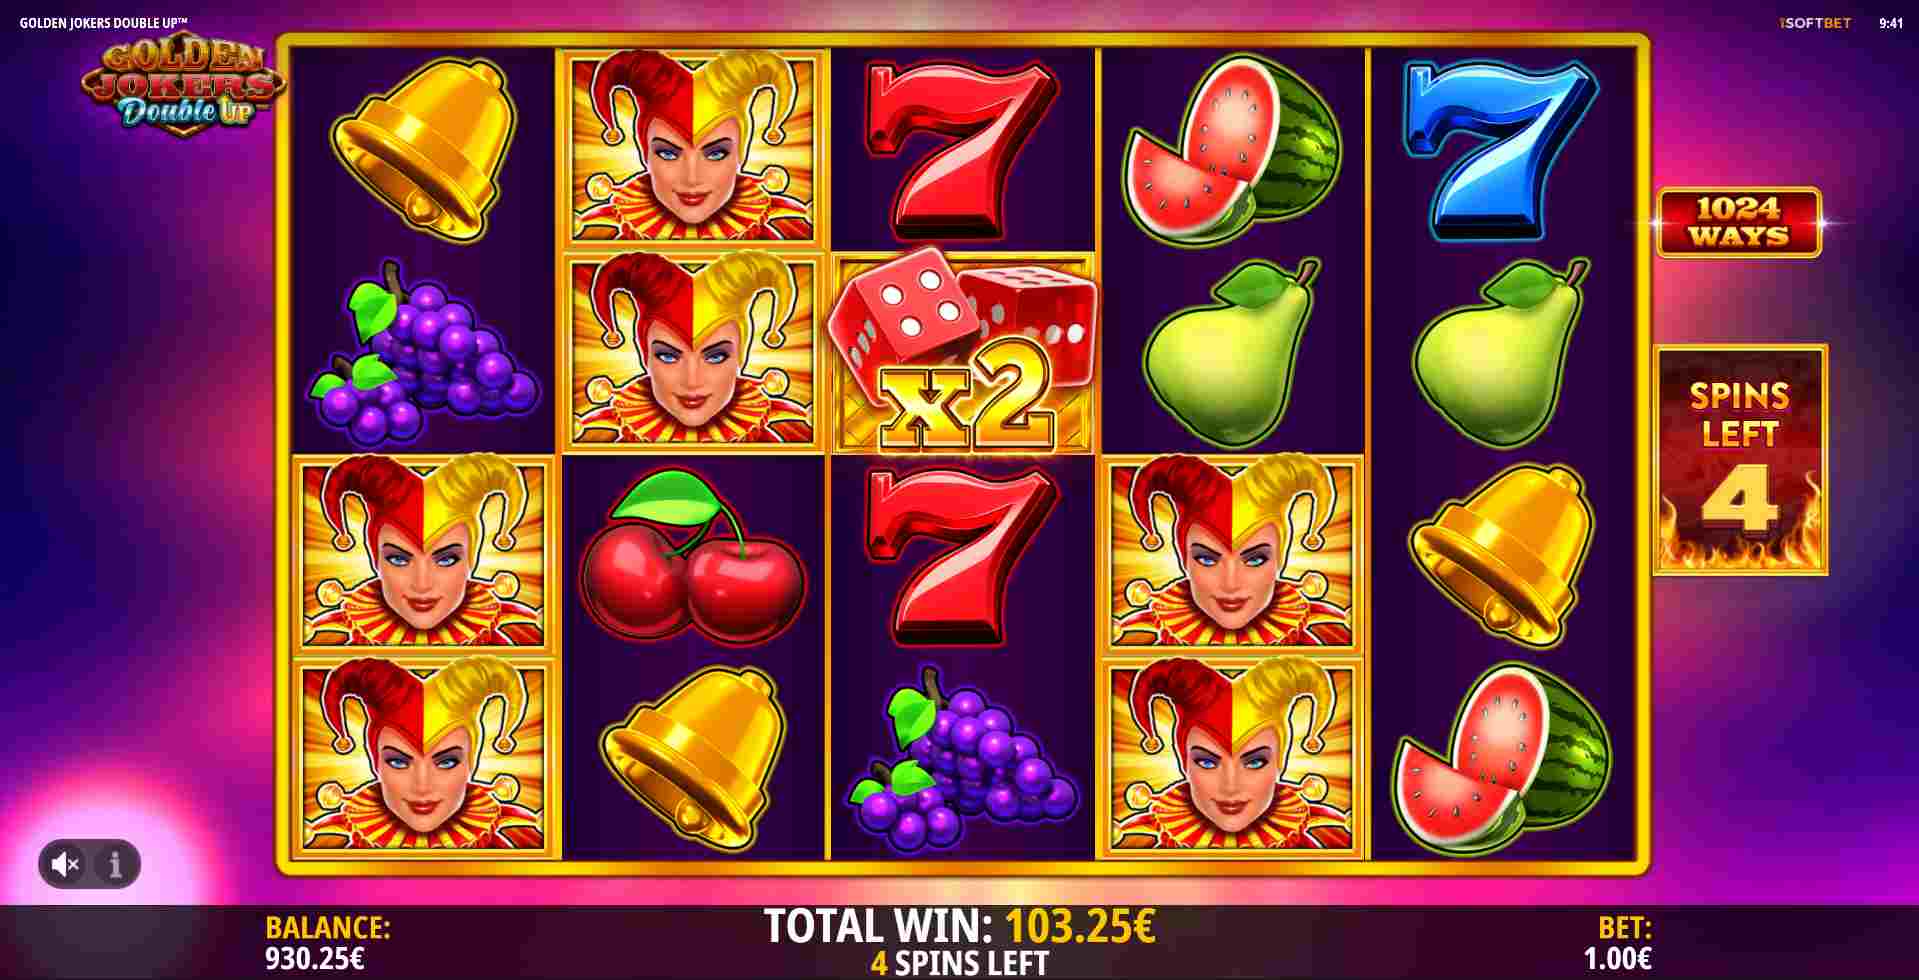 Golden Jokers Double Up Free Spins